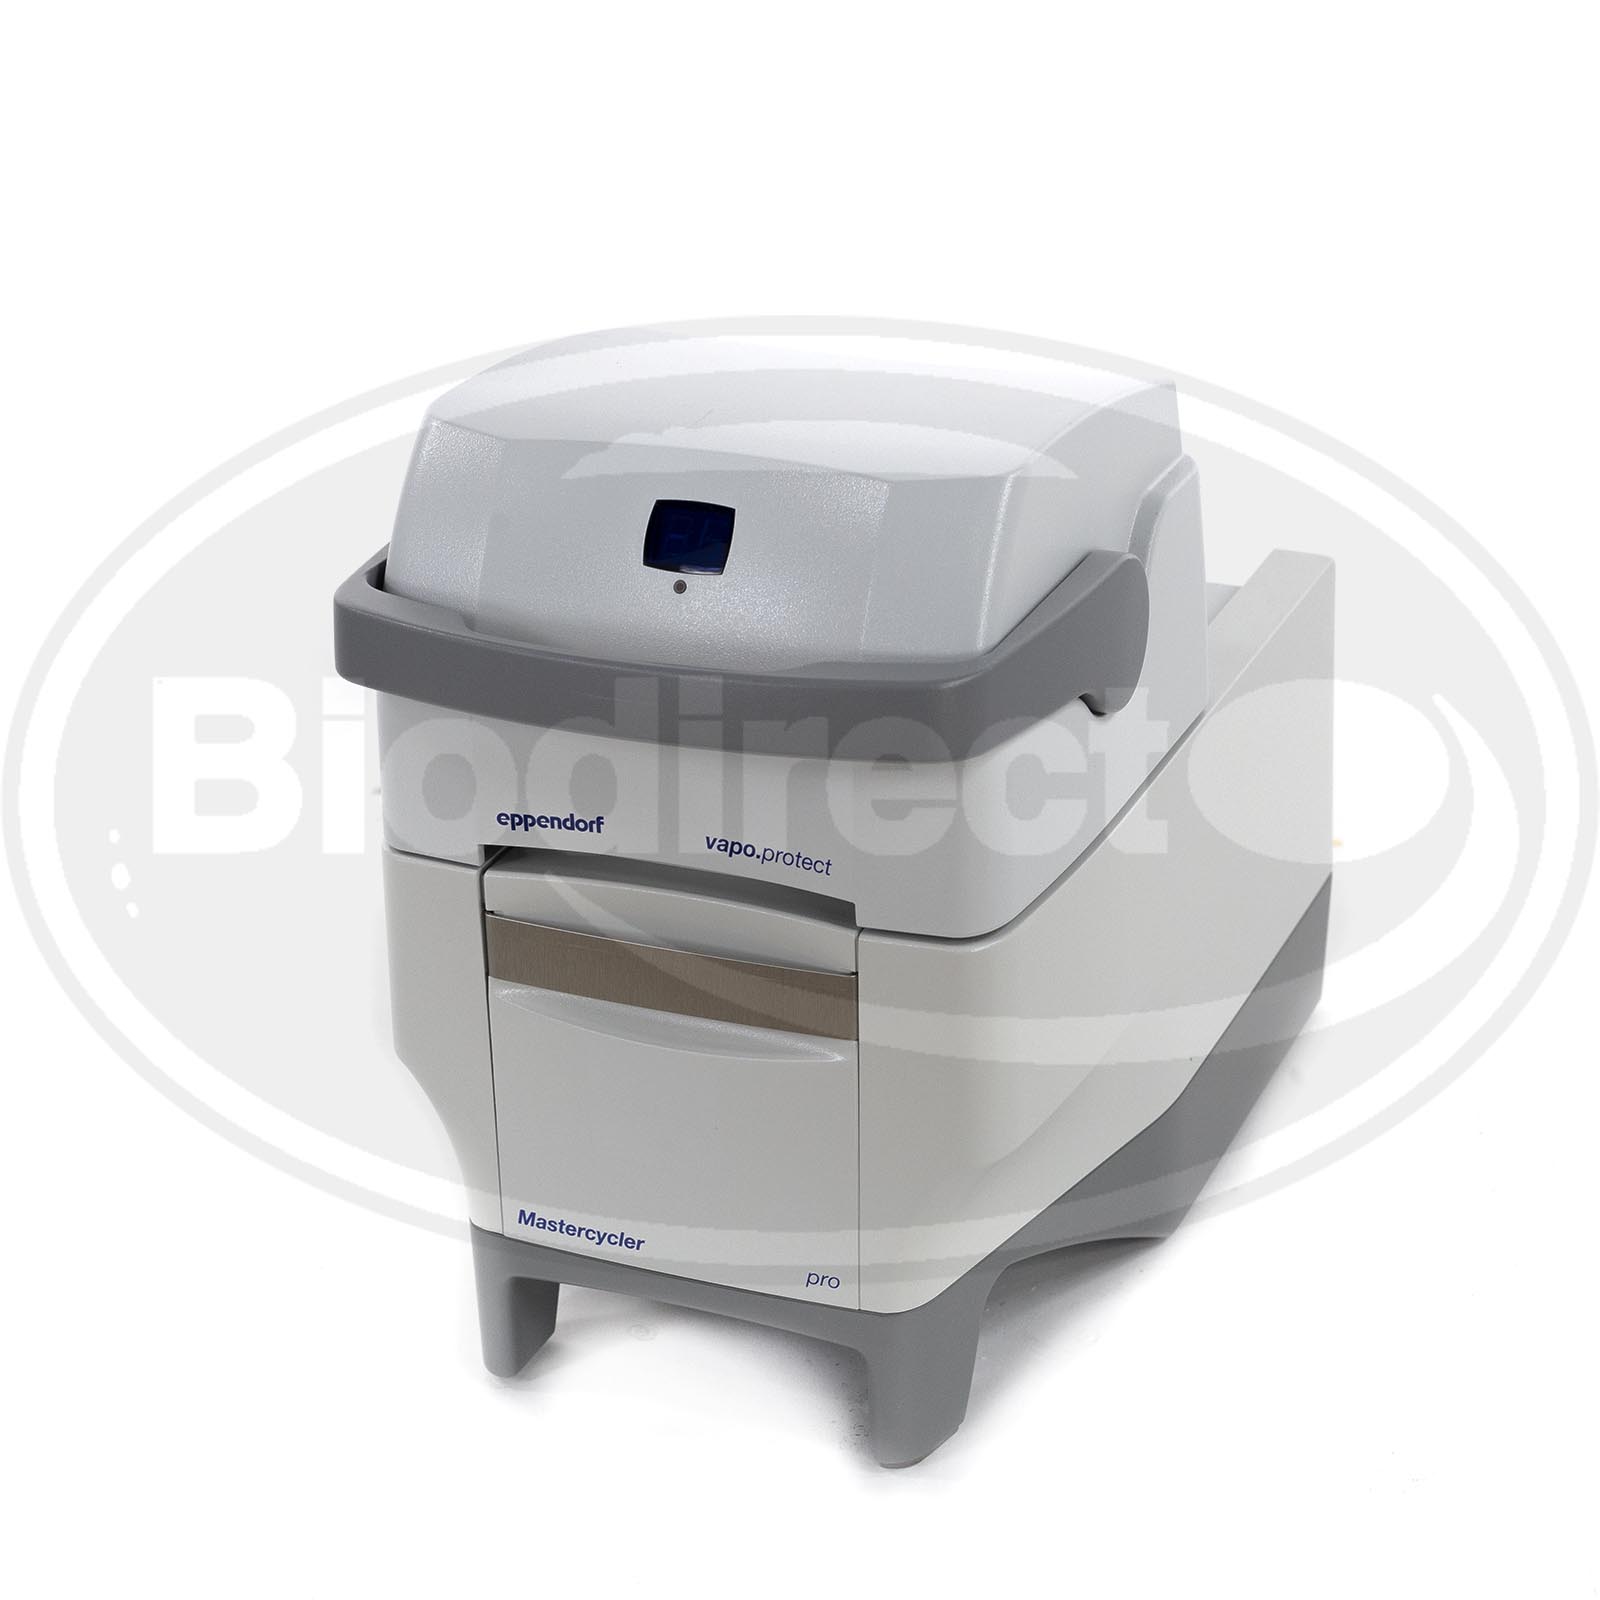 Eppendorf Thermal Cycler Mastercycler Pro